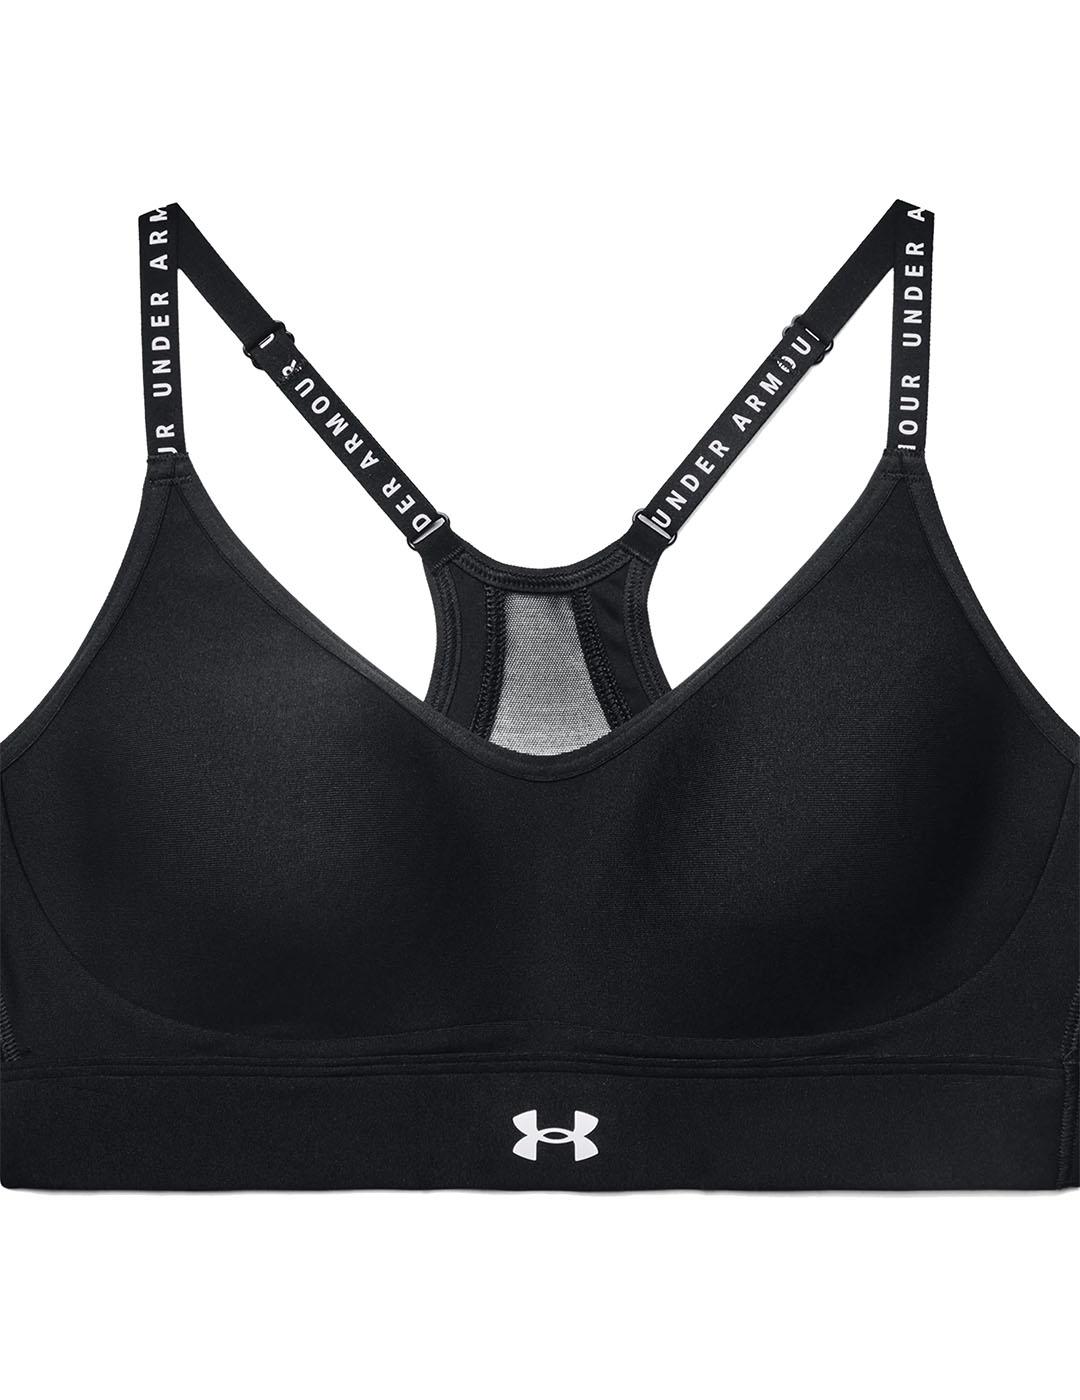 Sujetador Mujer Under Armour Infinity Low Covered Negro